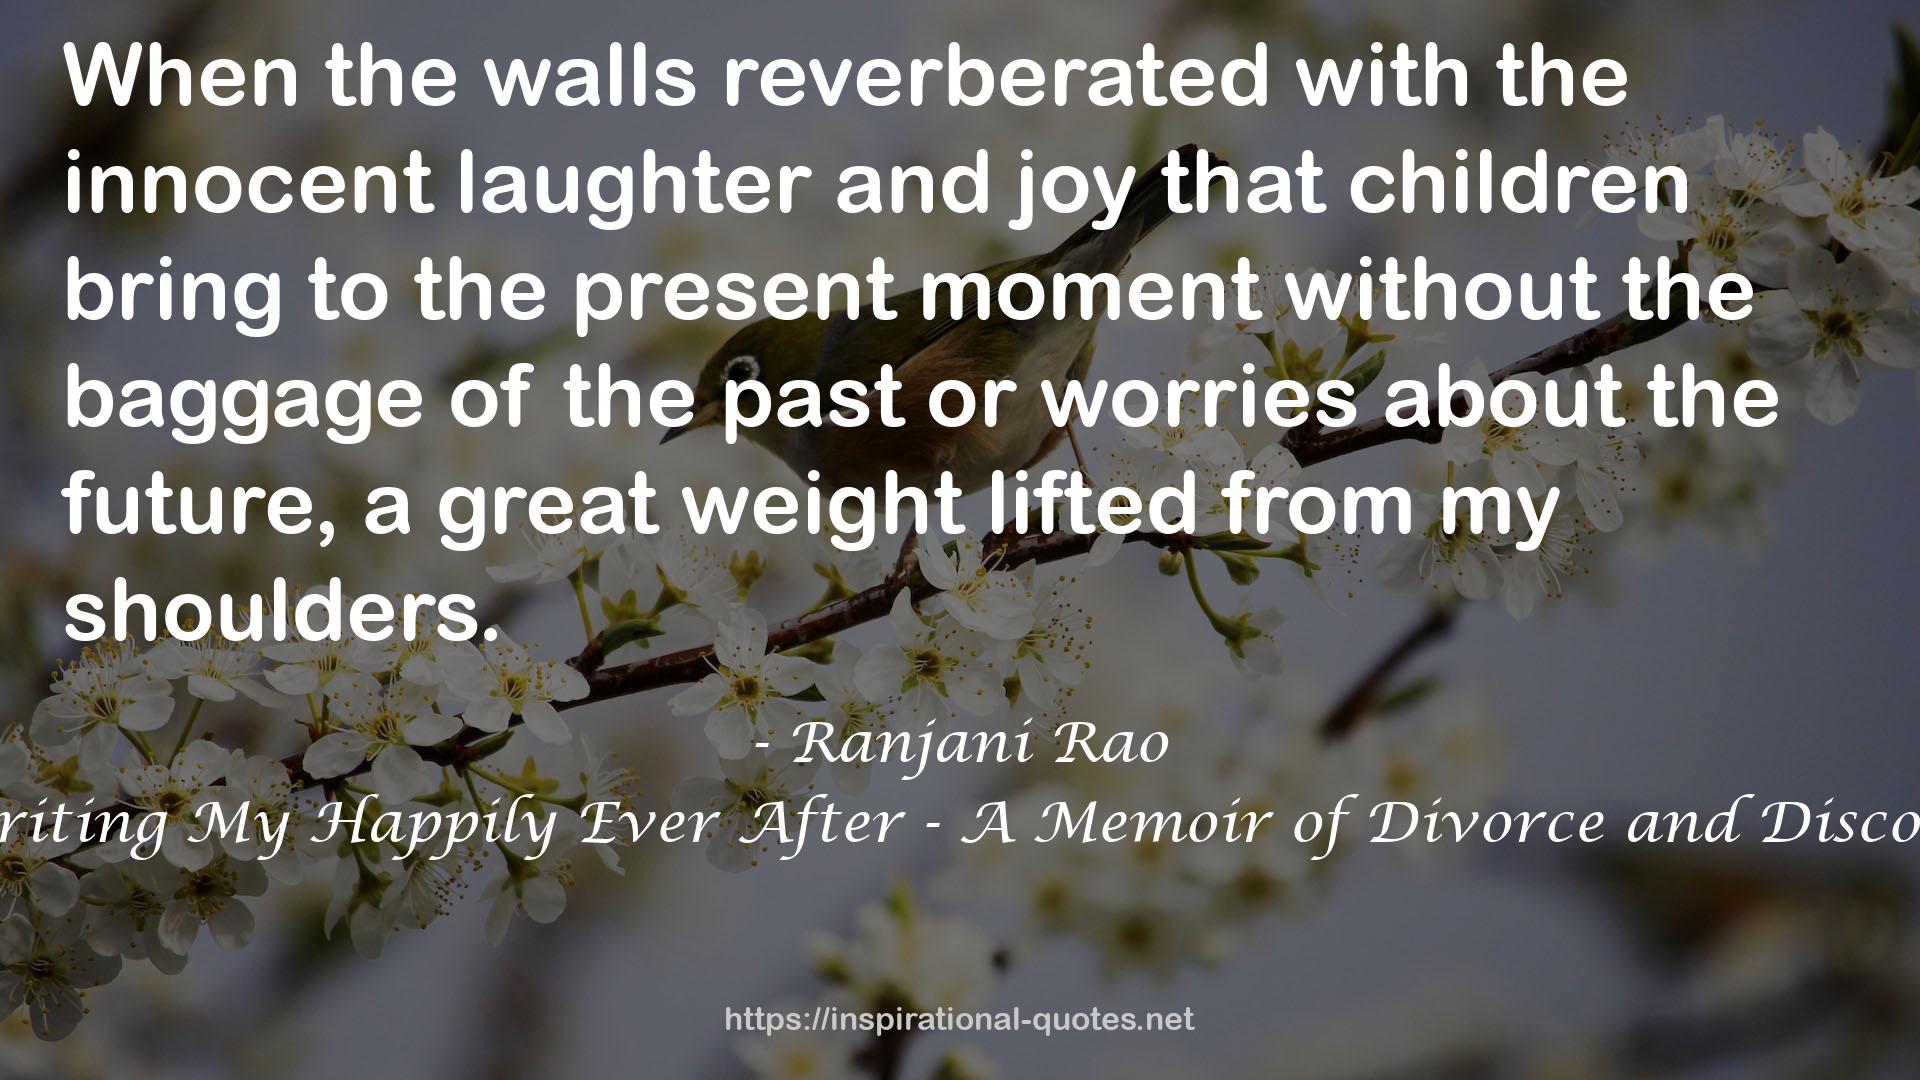 Rewriting My Happily Ever After - A Memoir of Divorce and Discovery QUOTES